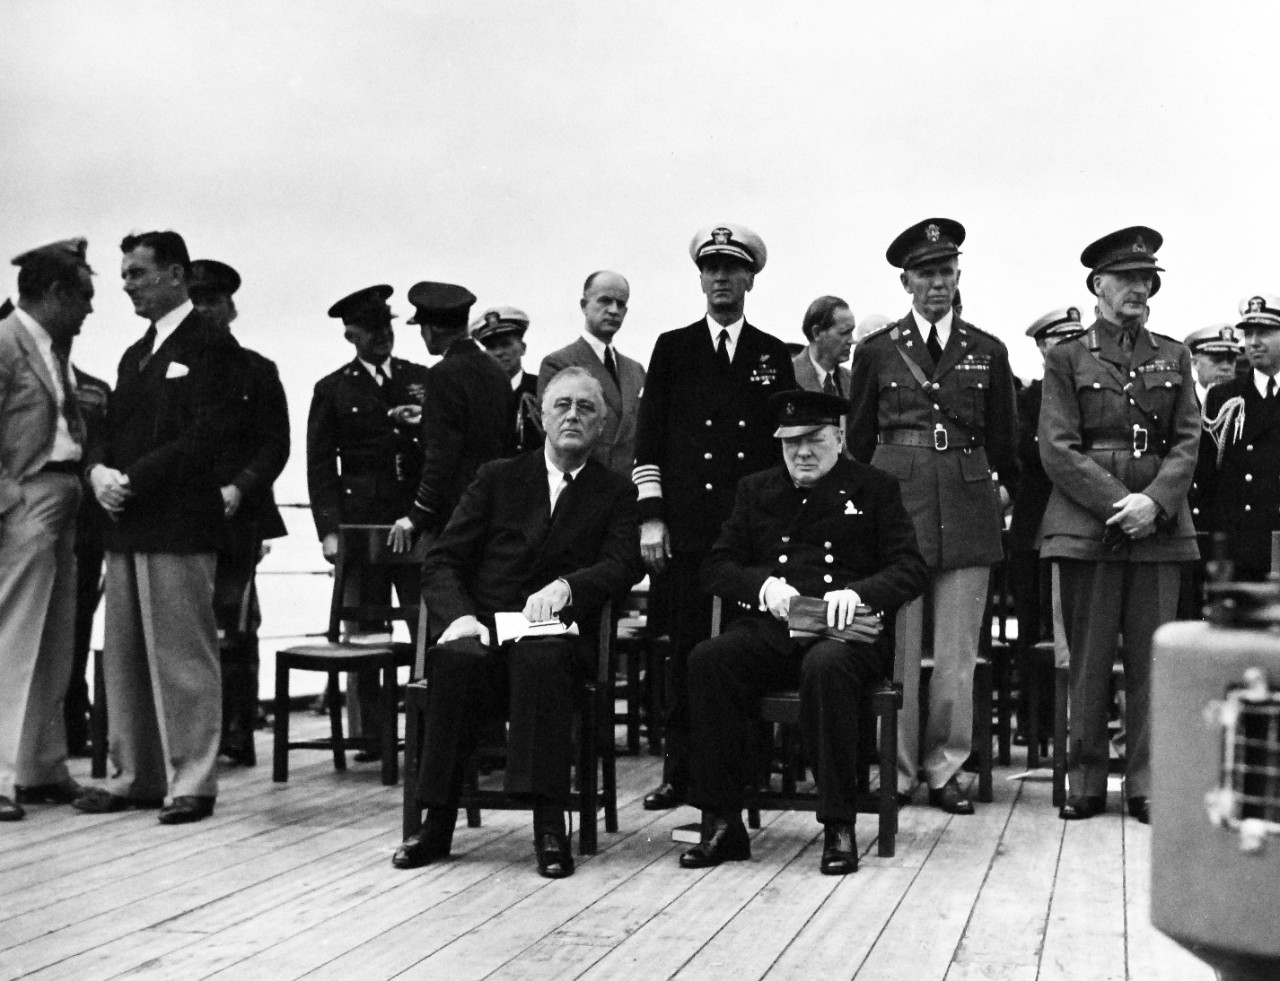 80-G-26848: Atlantic Charter, August 1941.  Informal group on deck of Royal Navy King George V battleship Prince of Wales following church services, during the Atlantic Charter meeting.  Sitting:  President Franklin D. Roosevelt and Prime Minister Winston S. Churchill.  Standing directly behind:  Admiral Ernest J. King;  General George C. Marshall; and General Sir John Dill.   Photograph released August 10, 1941.   Official U.S. Navy Photograph, now in the collections of the National Archives.  (2016/03/22).